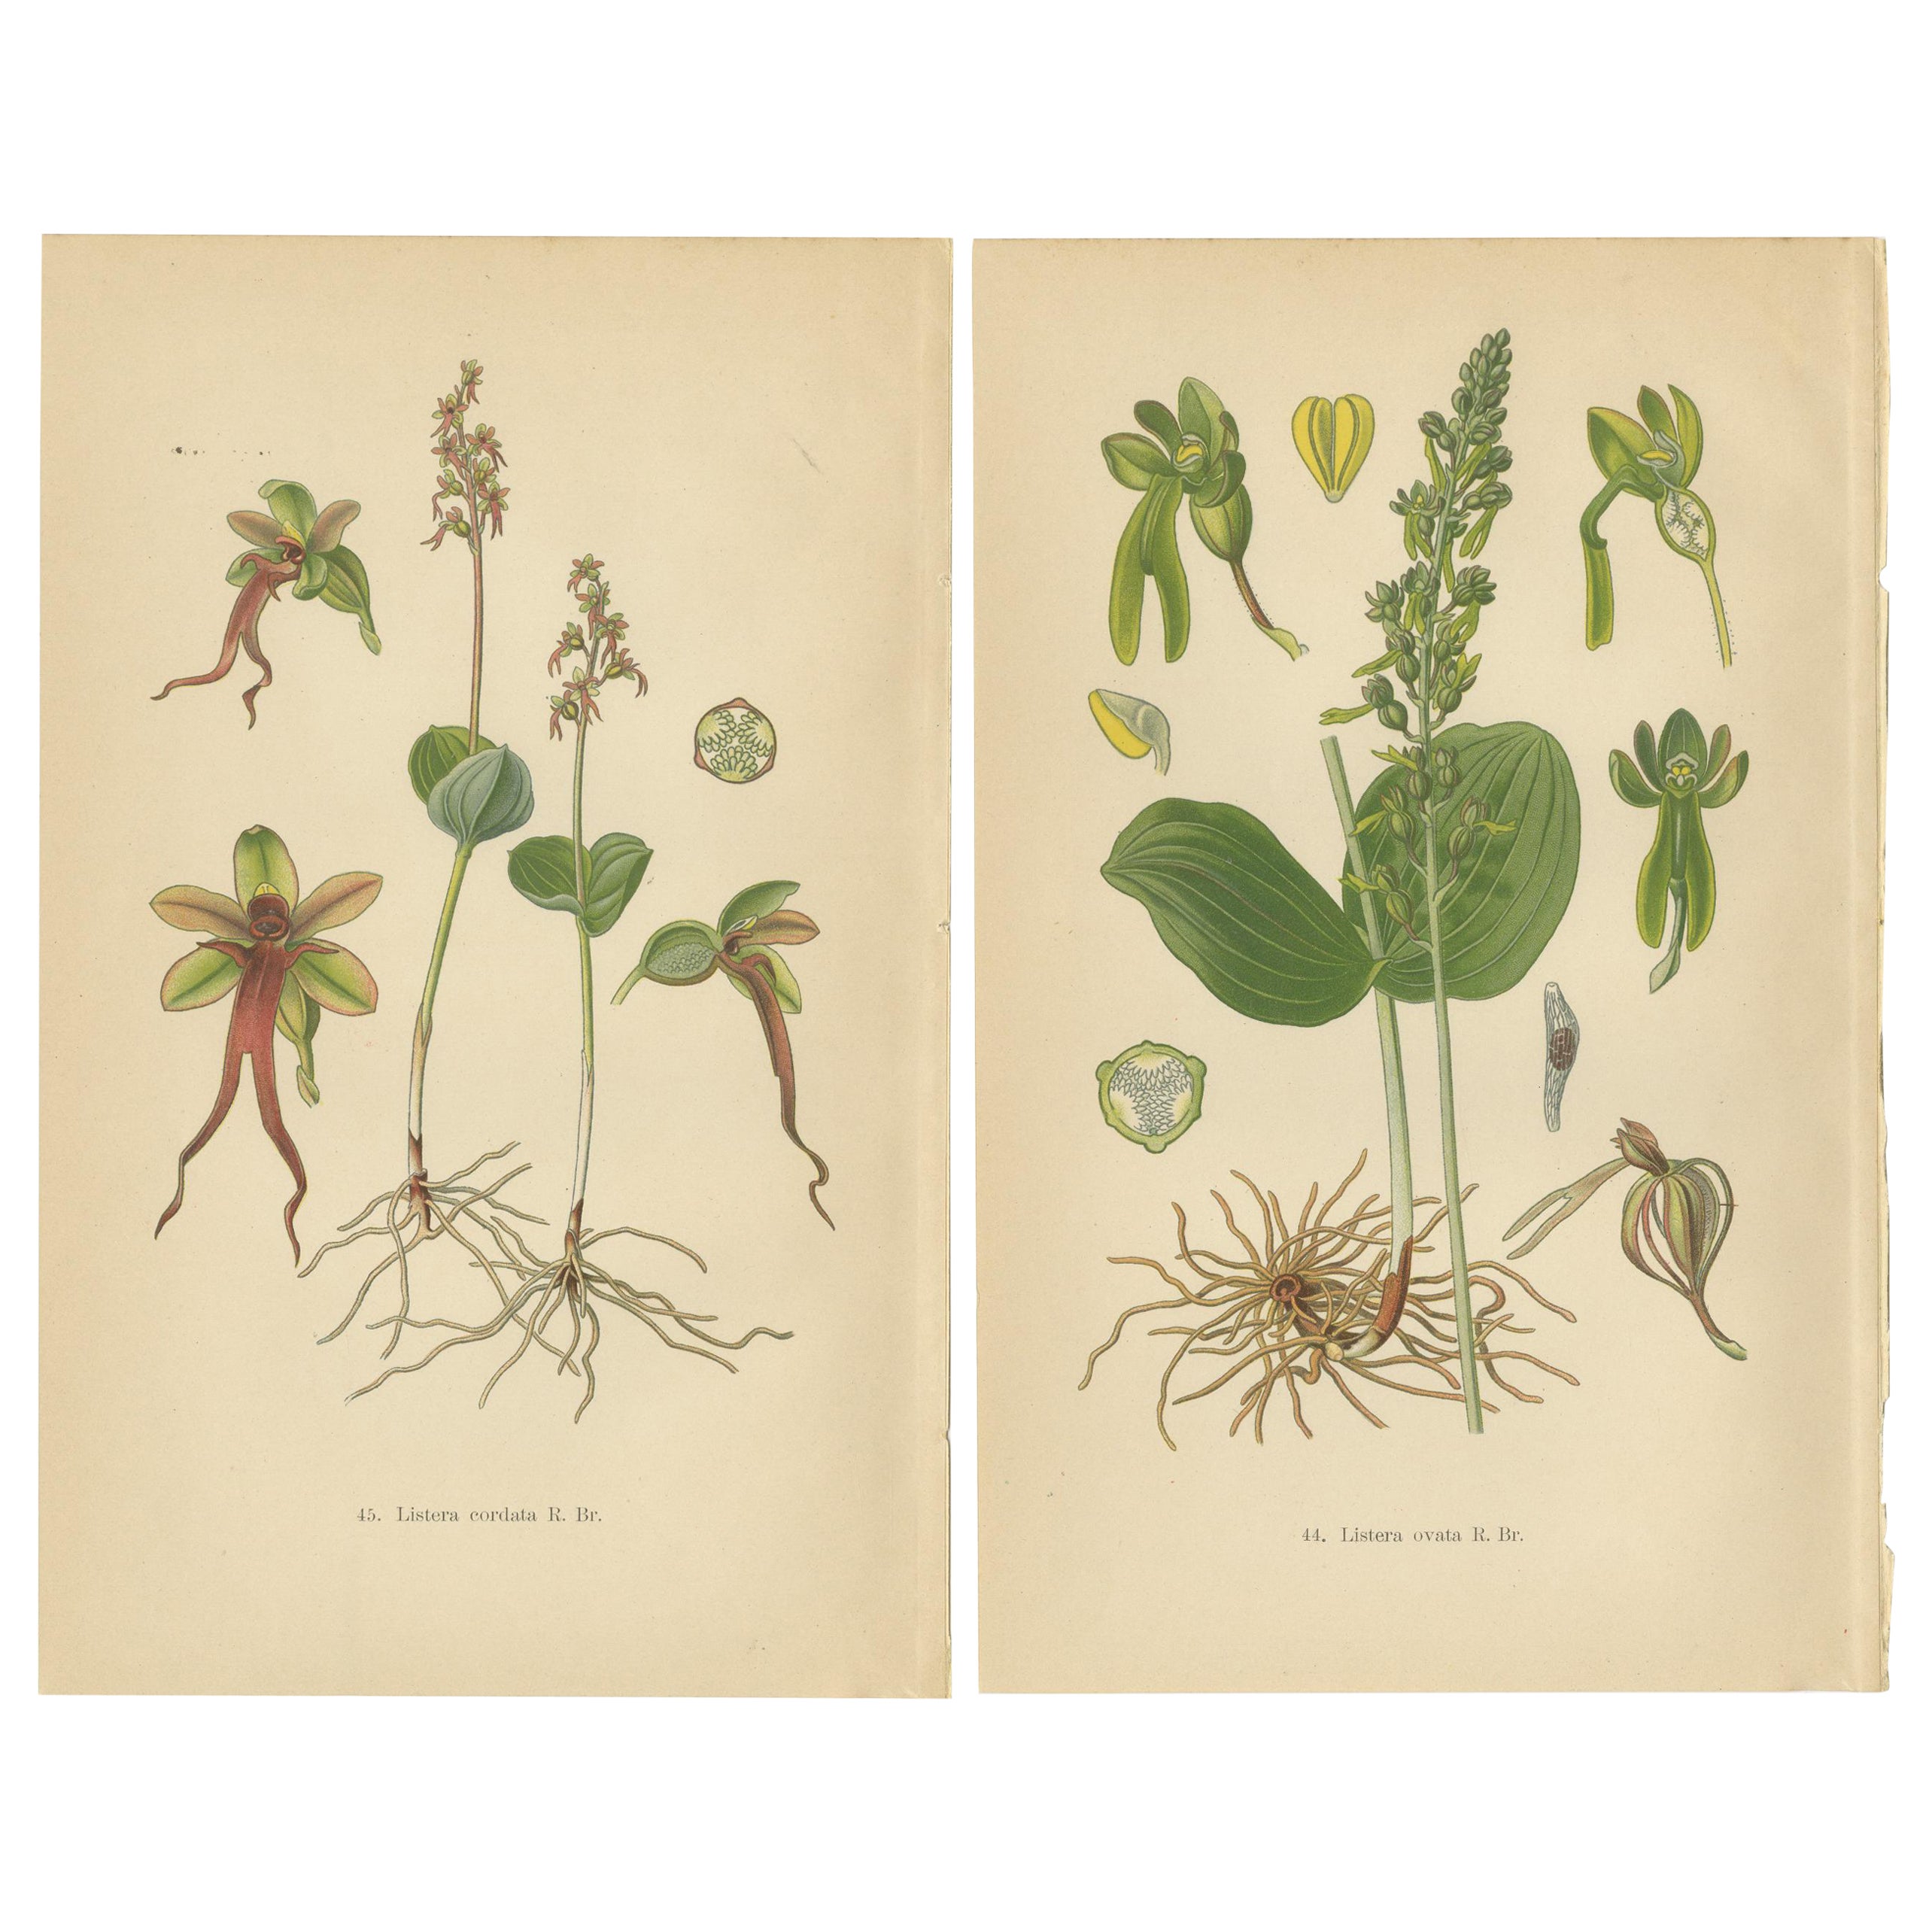 Listera Lore: Botanical Illustrations of Heart-Leaved Orchids from 1904